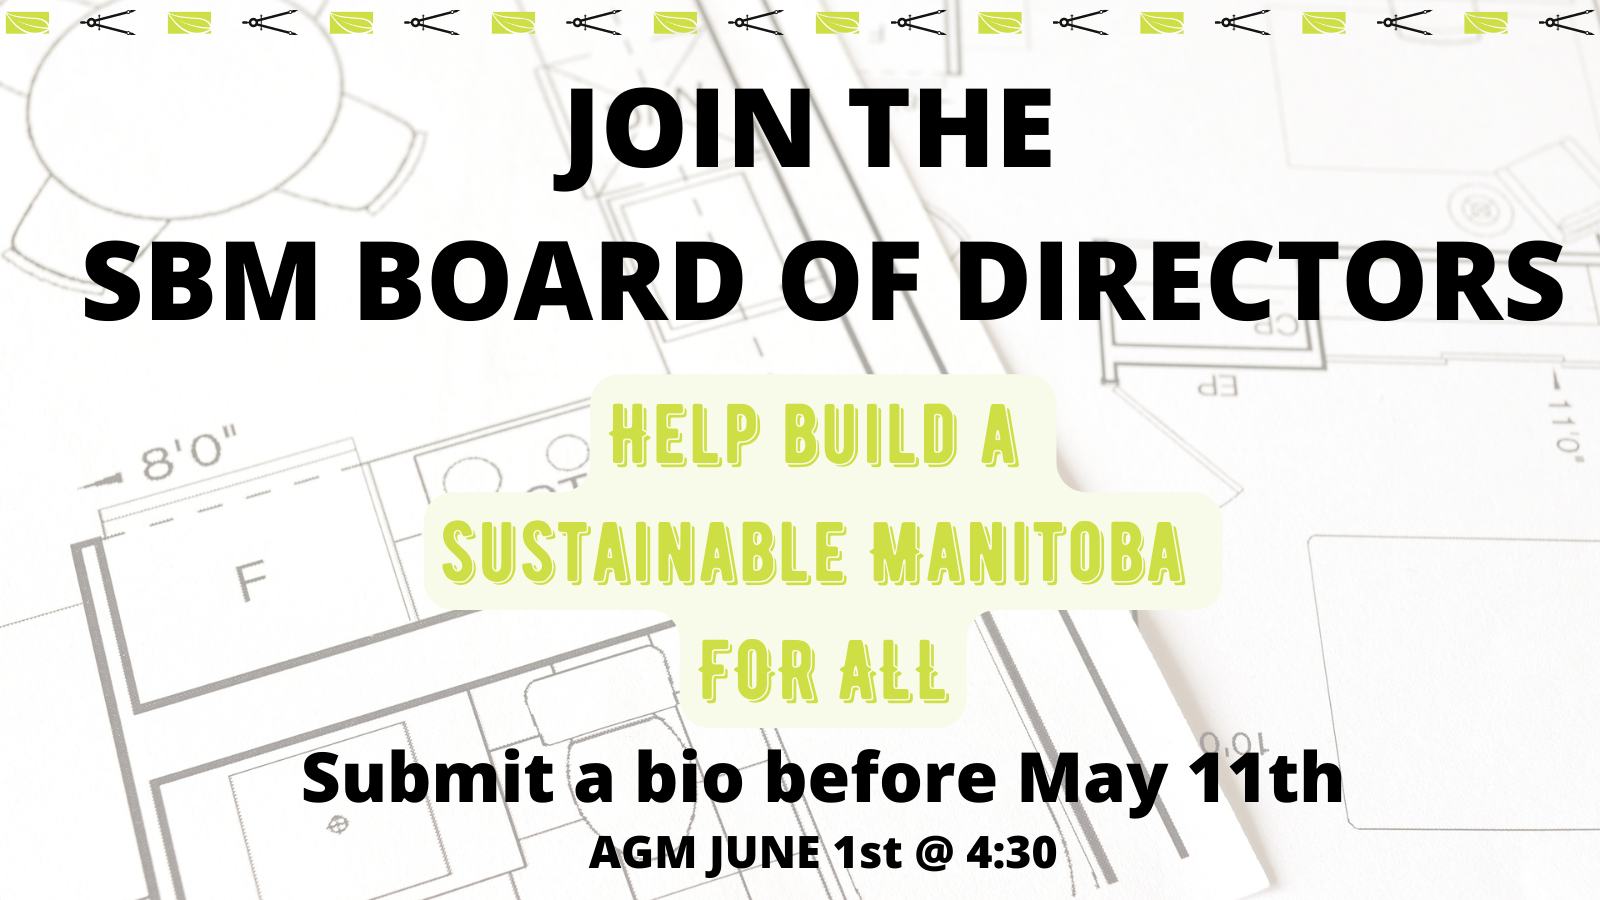 Join the SBM Board of Directors Help build a sustainable Manitoba for all submit a bio before May 11th, AGM June 1st